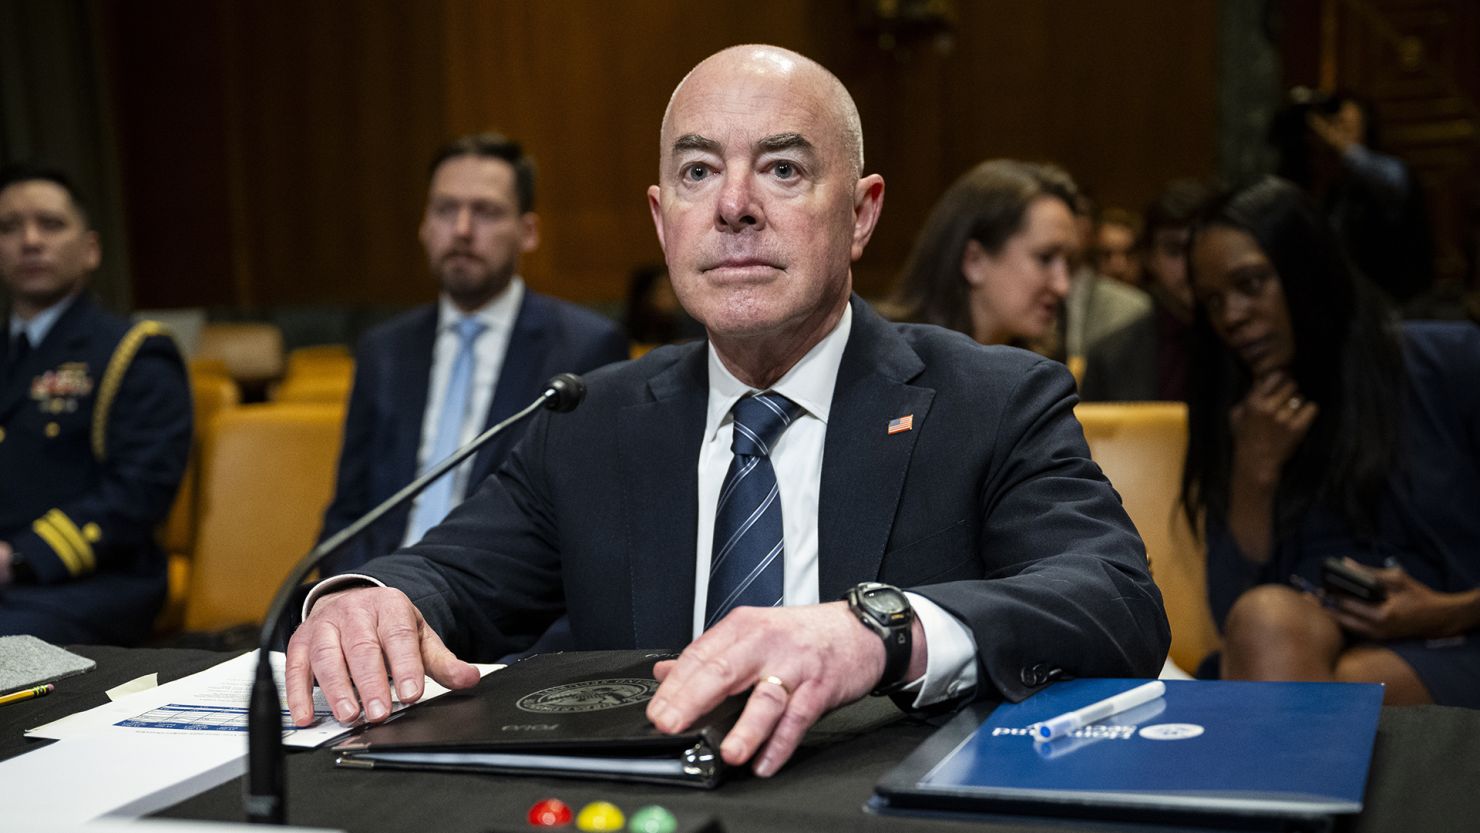 Secretary of the Department of Homeland Security Alejandro Mayorkas testifying at a Senate subcommittee hearing on April 10 at the US Capitol.